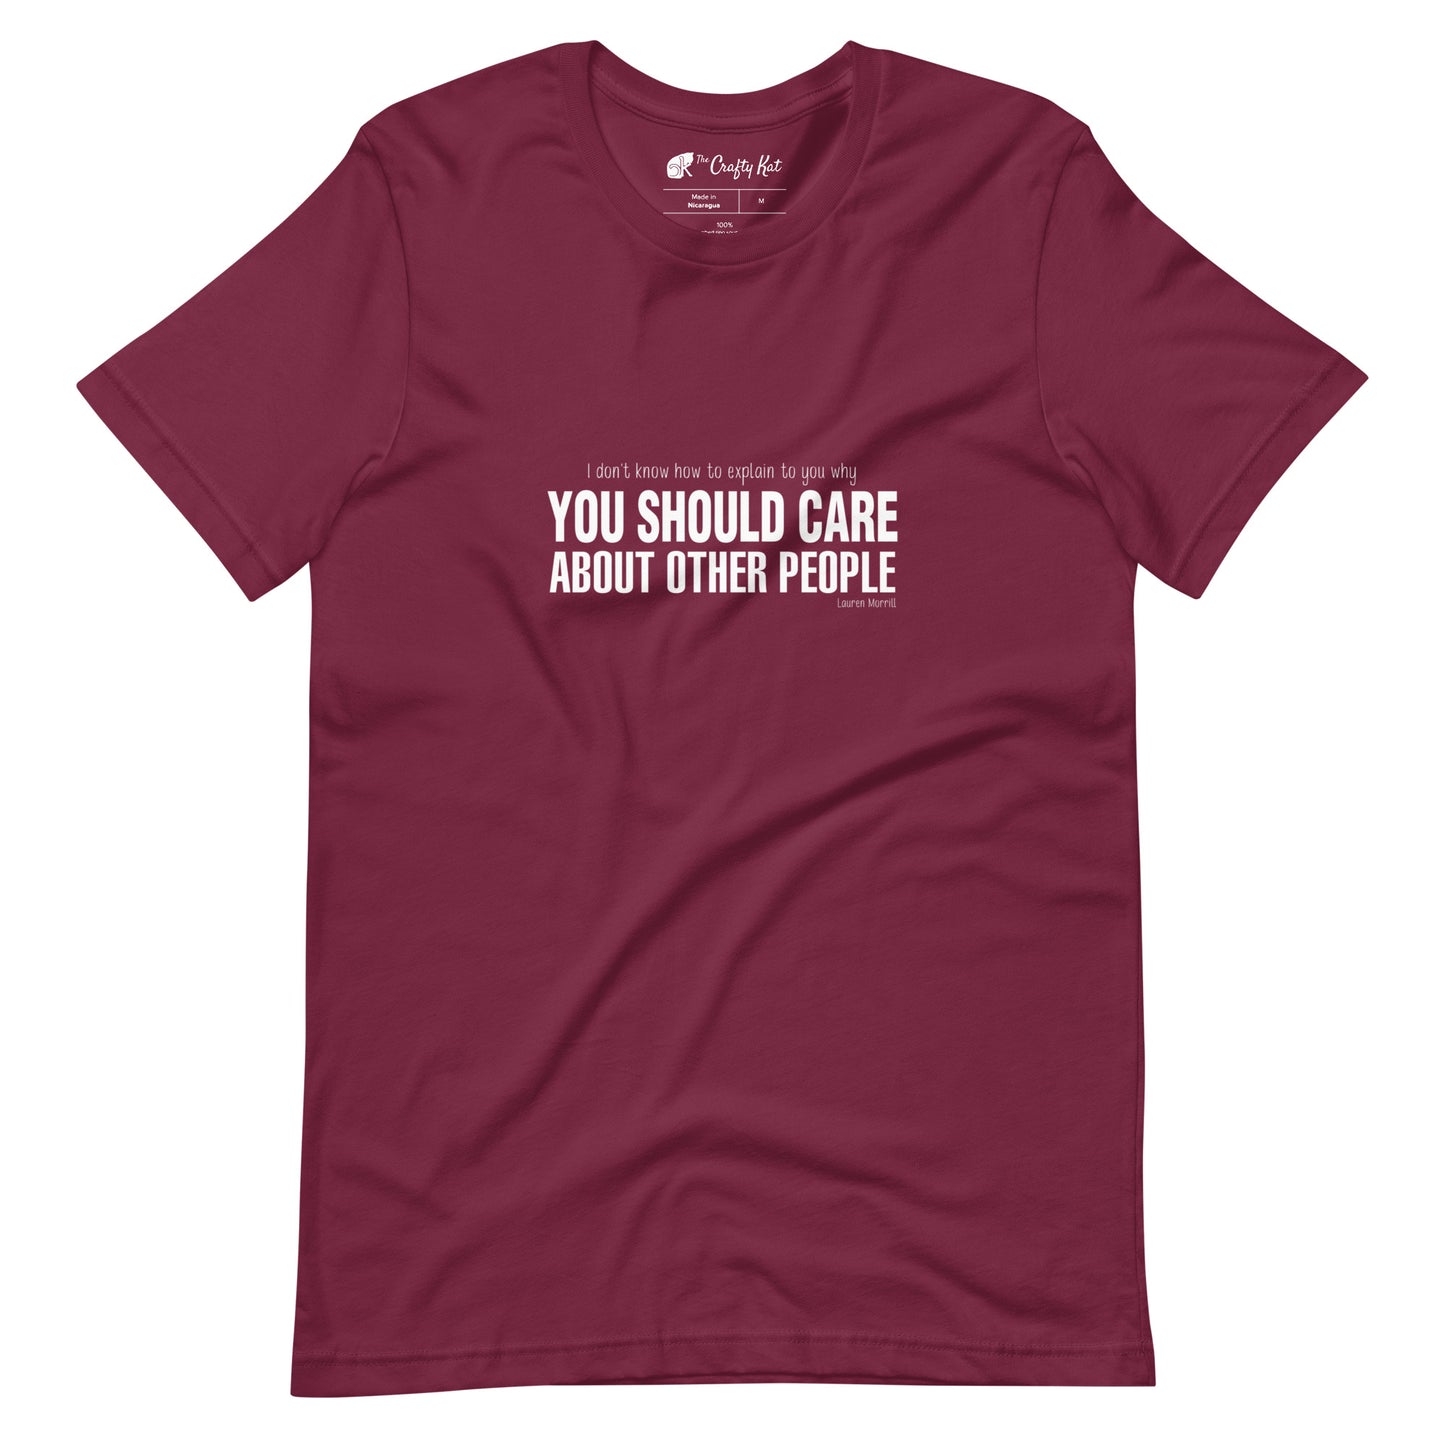 Maroon t-shirt with quote by Lauren Morrill: "I don't know how to explain to you why YOU SHOULD CARE ABOUT OTHER PEOPLE"